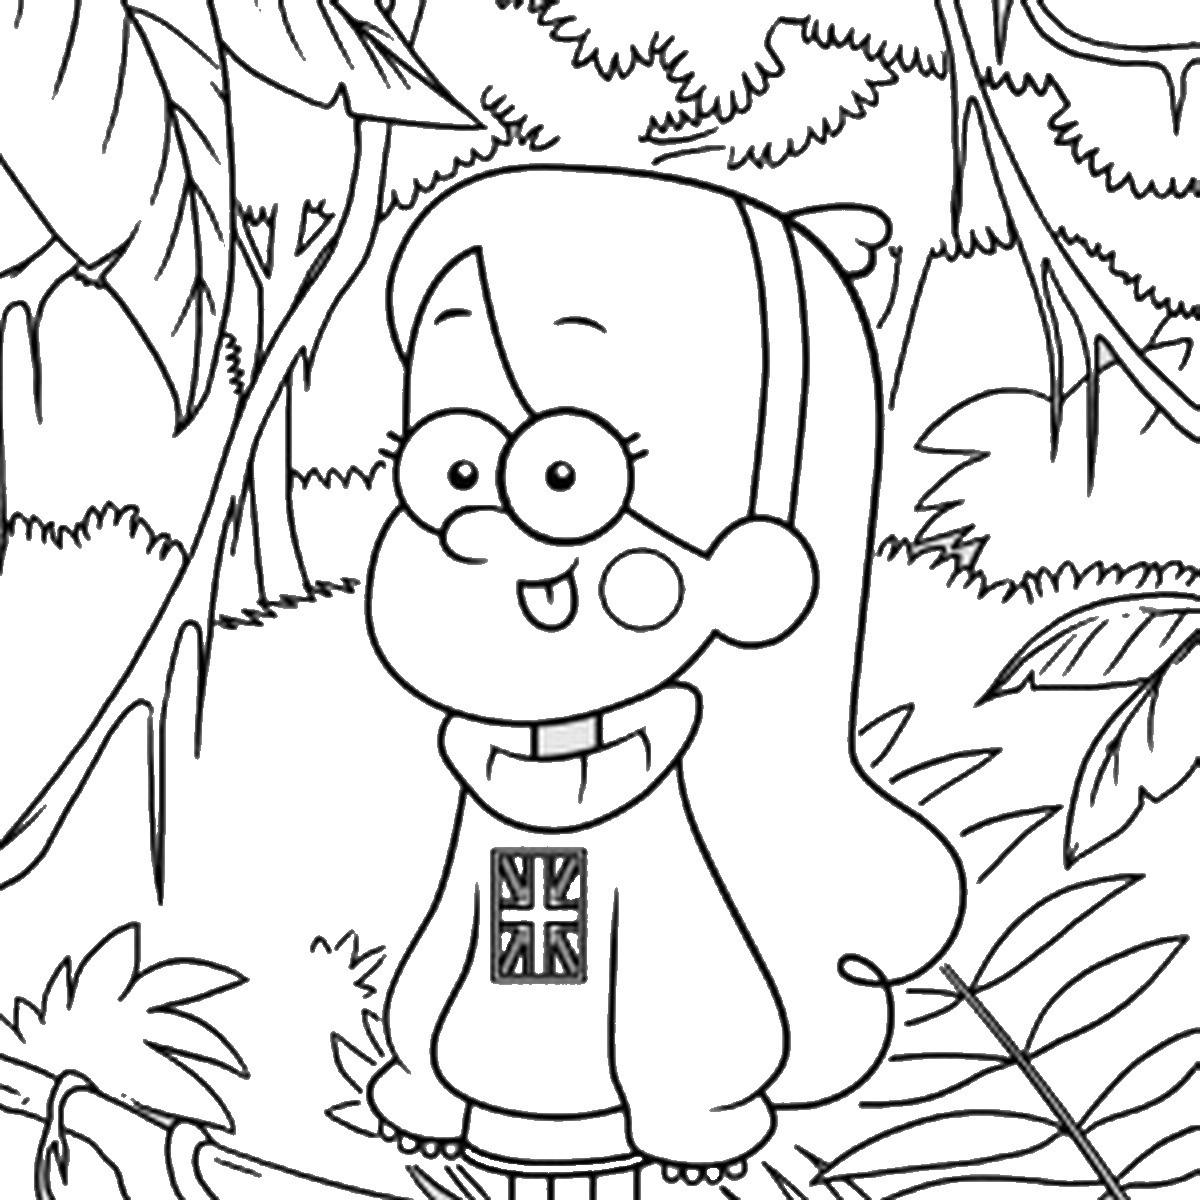 Gravity Falls Coloring Book
 Bill Cipher Gravity Falls Coloring Pages Coloring Pages